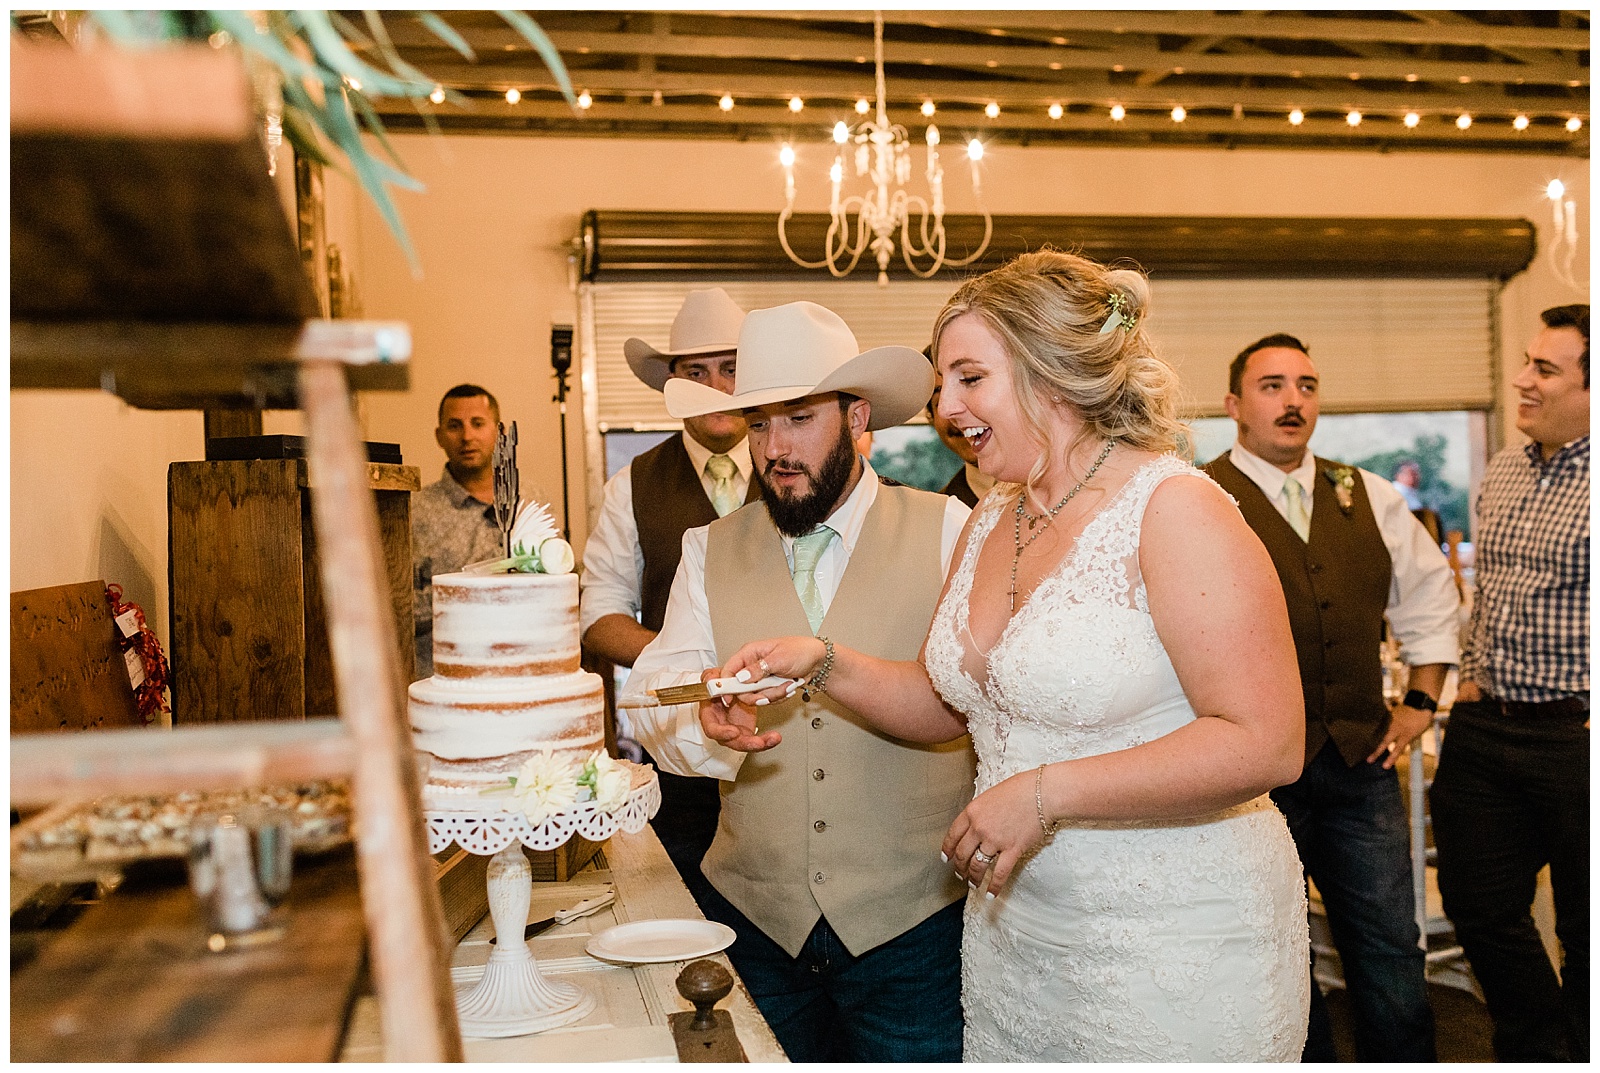 bride and groom cutting the cake